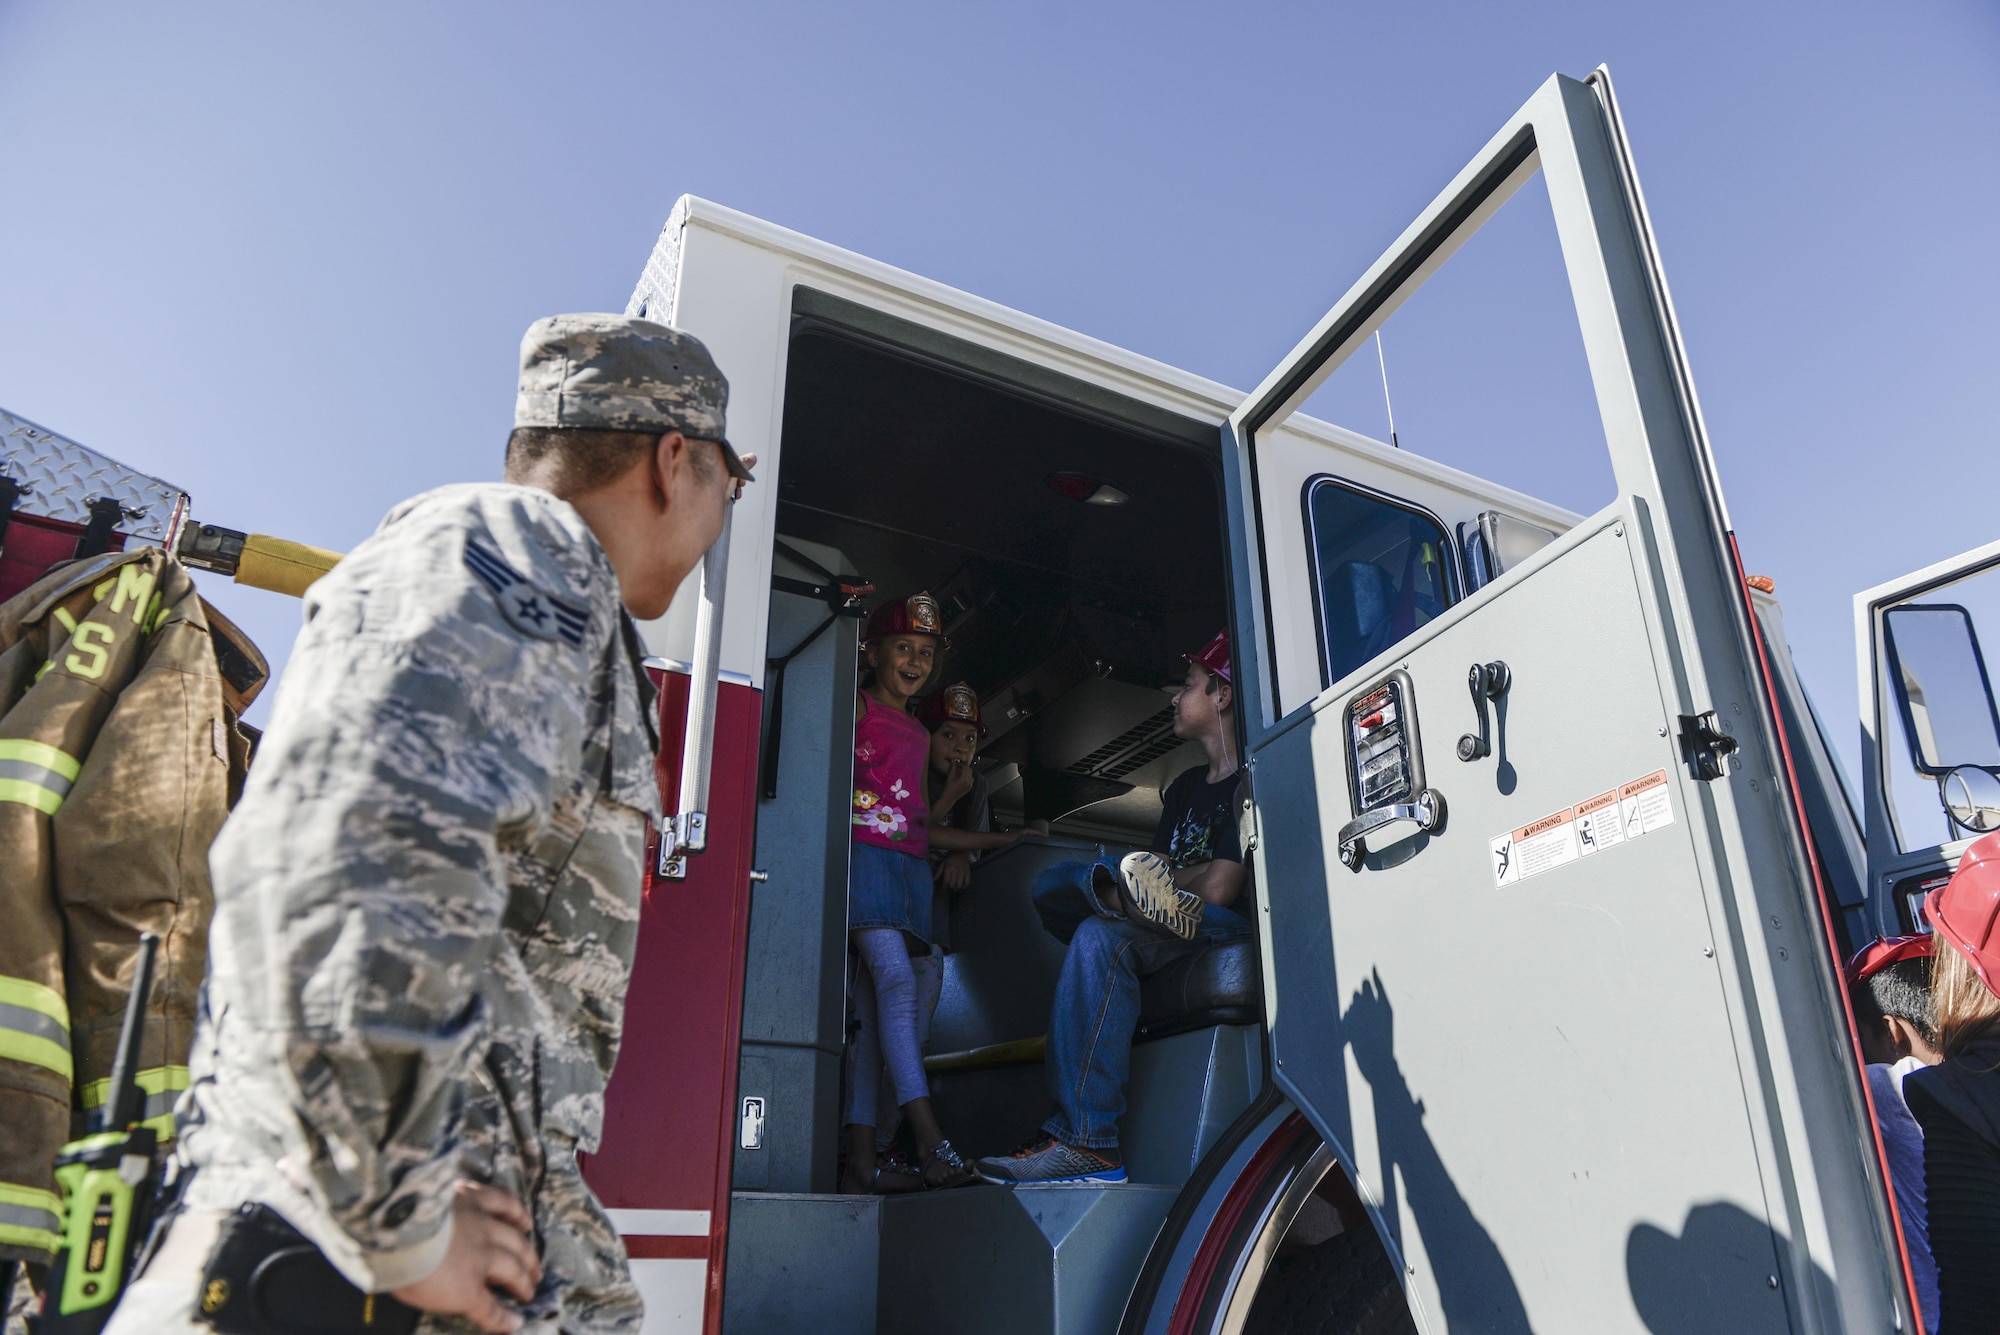 A group of children sit inside a fire truck at Holloman Air Force Base’s elementary school as part of the base’s annual Fire Prevention Week, Oct. 11, 2016 at Holloman Air Force Base, N.M. Sparky the Fire Dog and members with the 49th Civil Engineer Squadron Fire Protection Flight, educated students on fire safety and allowed them to explore two fire trucks. (U.S. Air Force photo by Airman 1st Class Alexis P. Docherty)